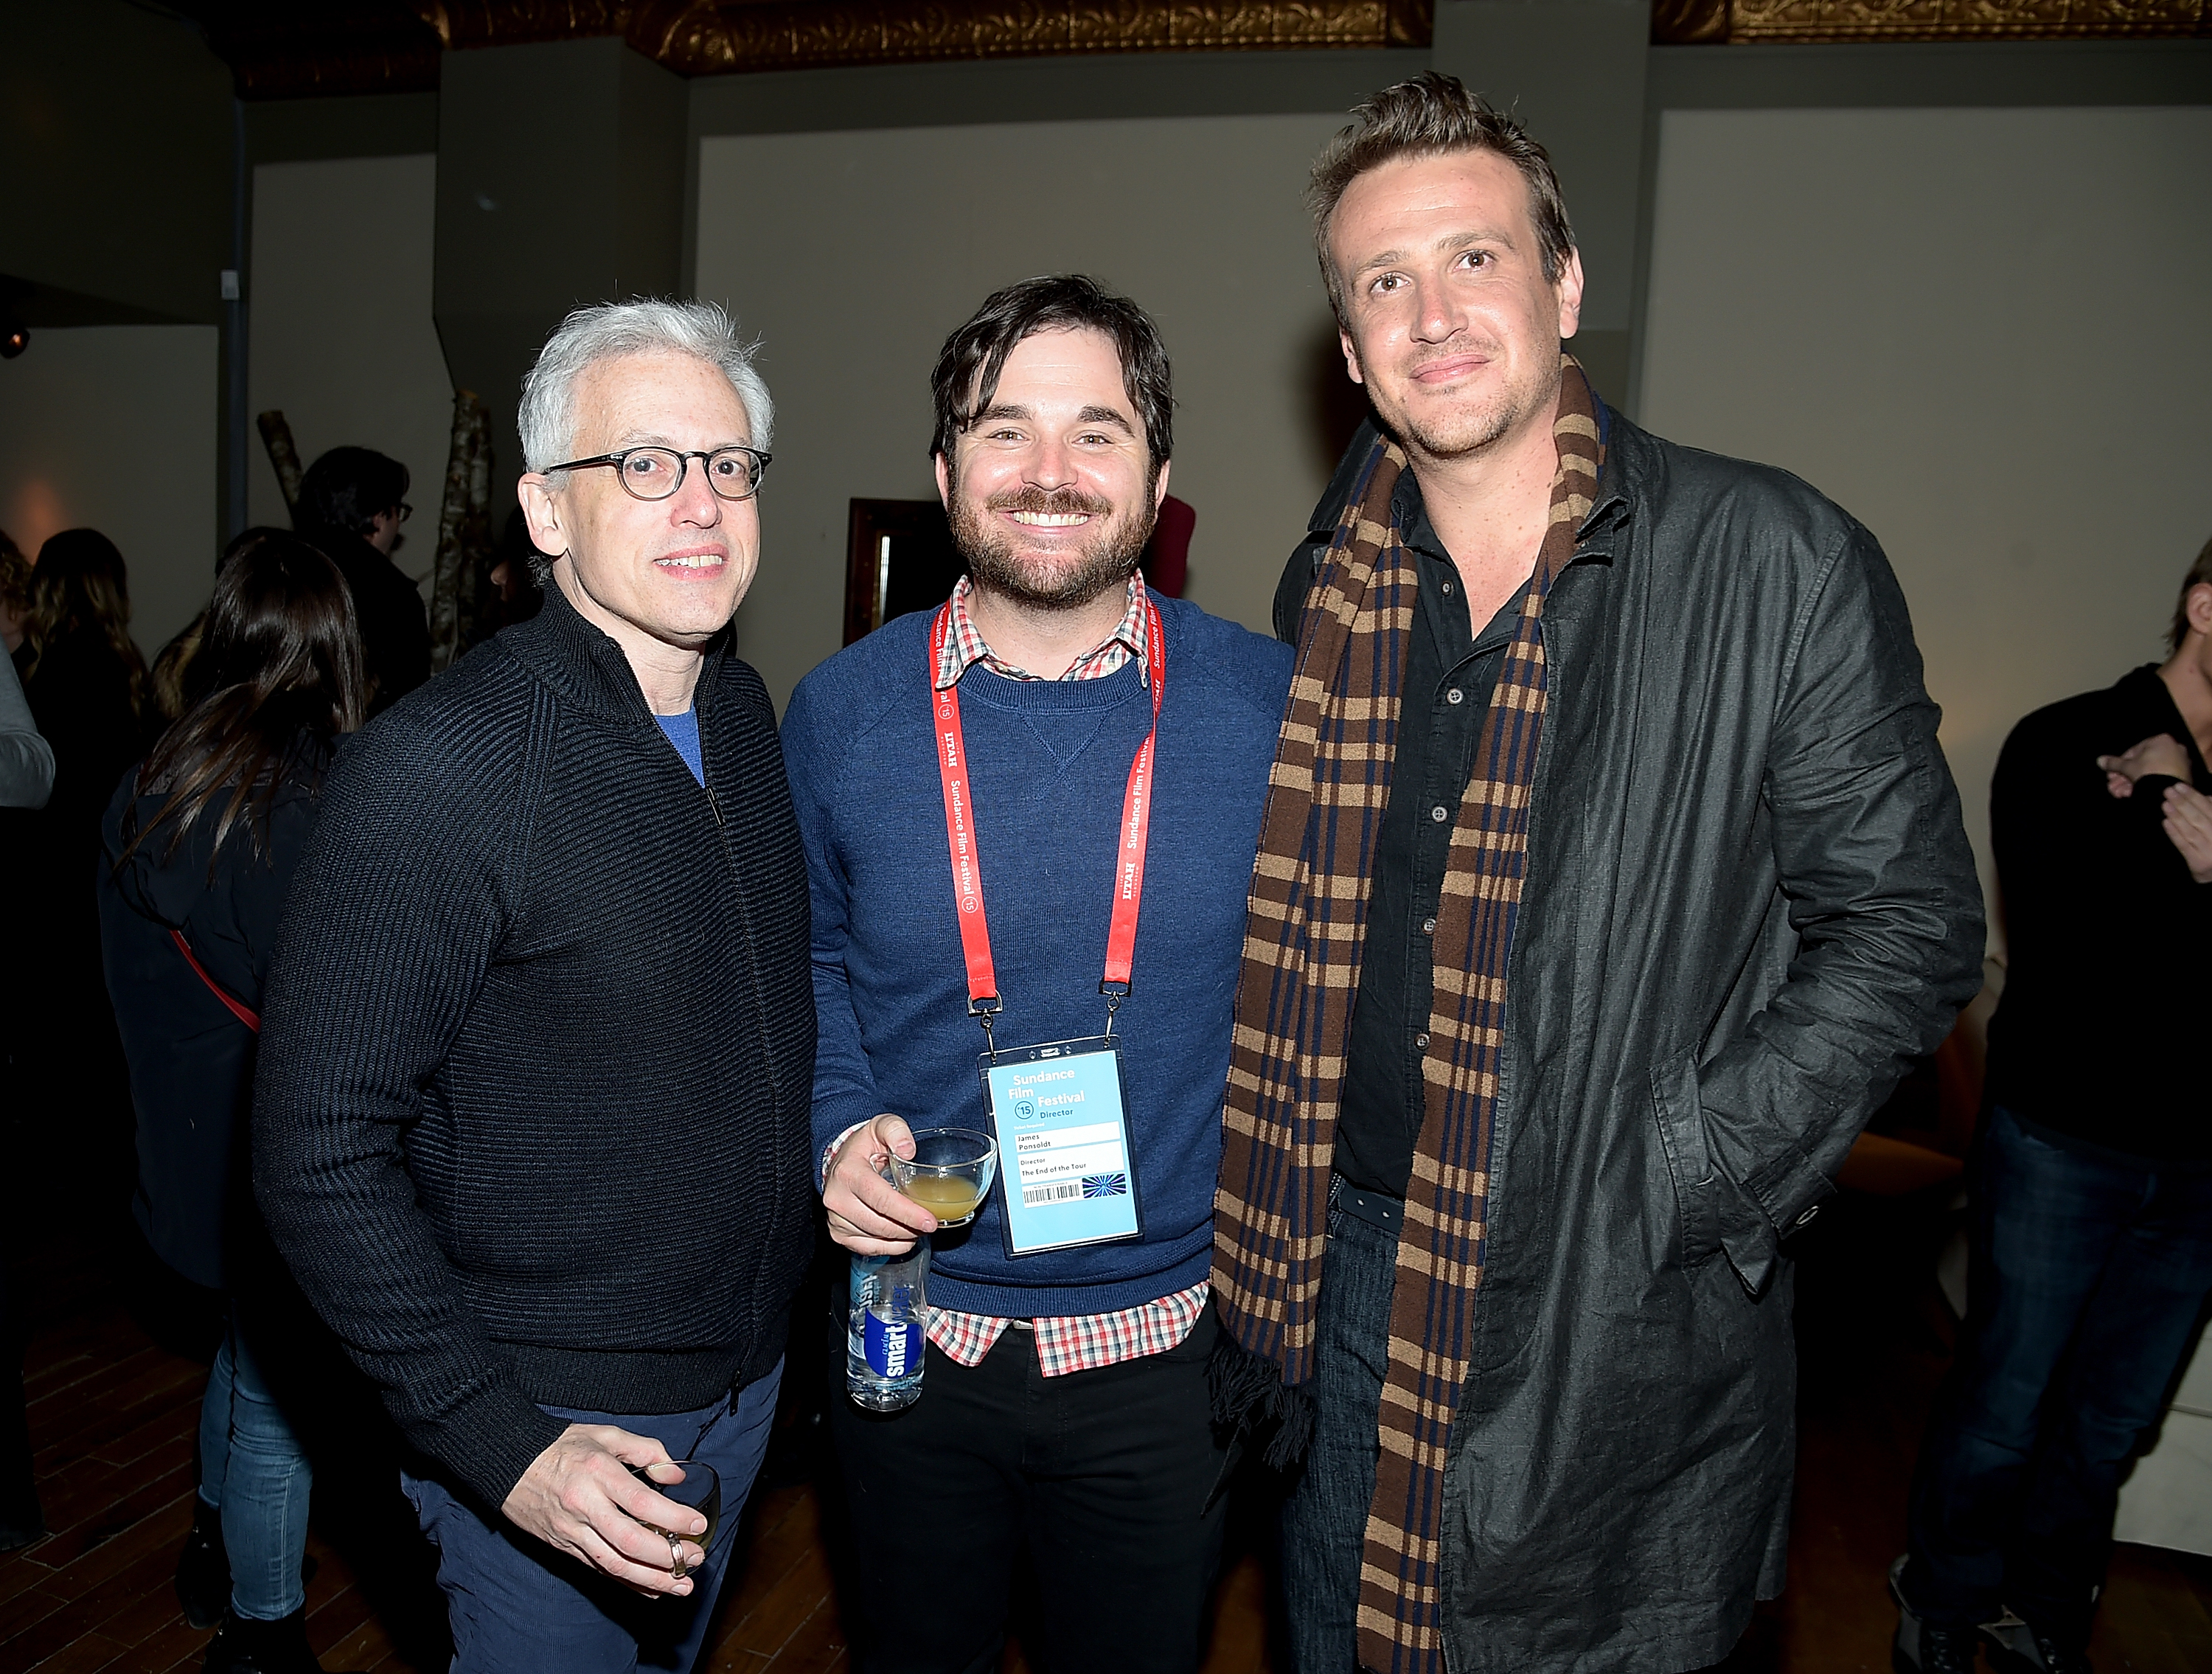 Donald Margulies, James Ponsoldt and Jason Segel attend GREY GOOSE Blue Door Hosts "The End of Tour" Party 